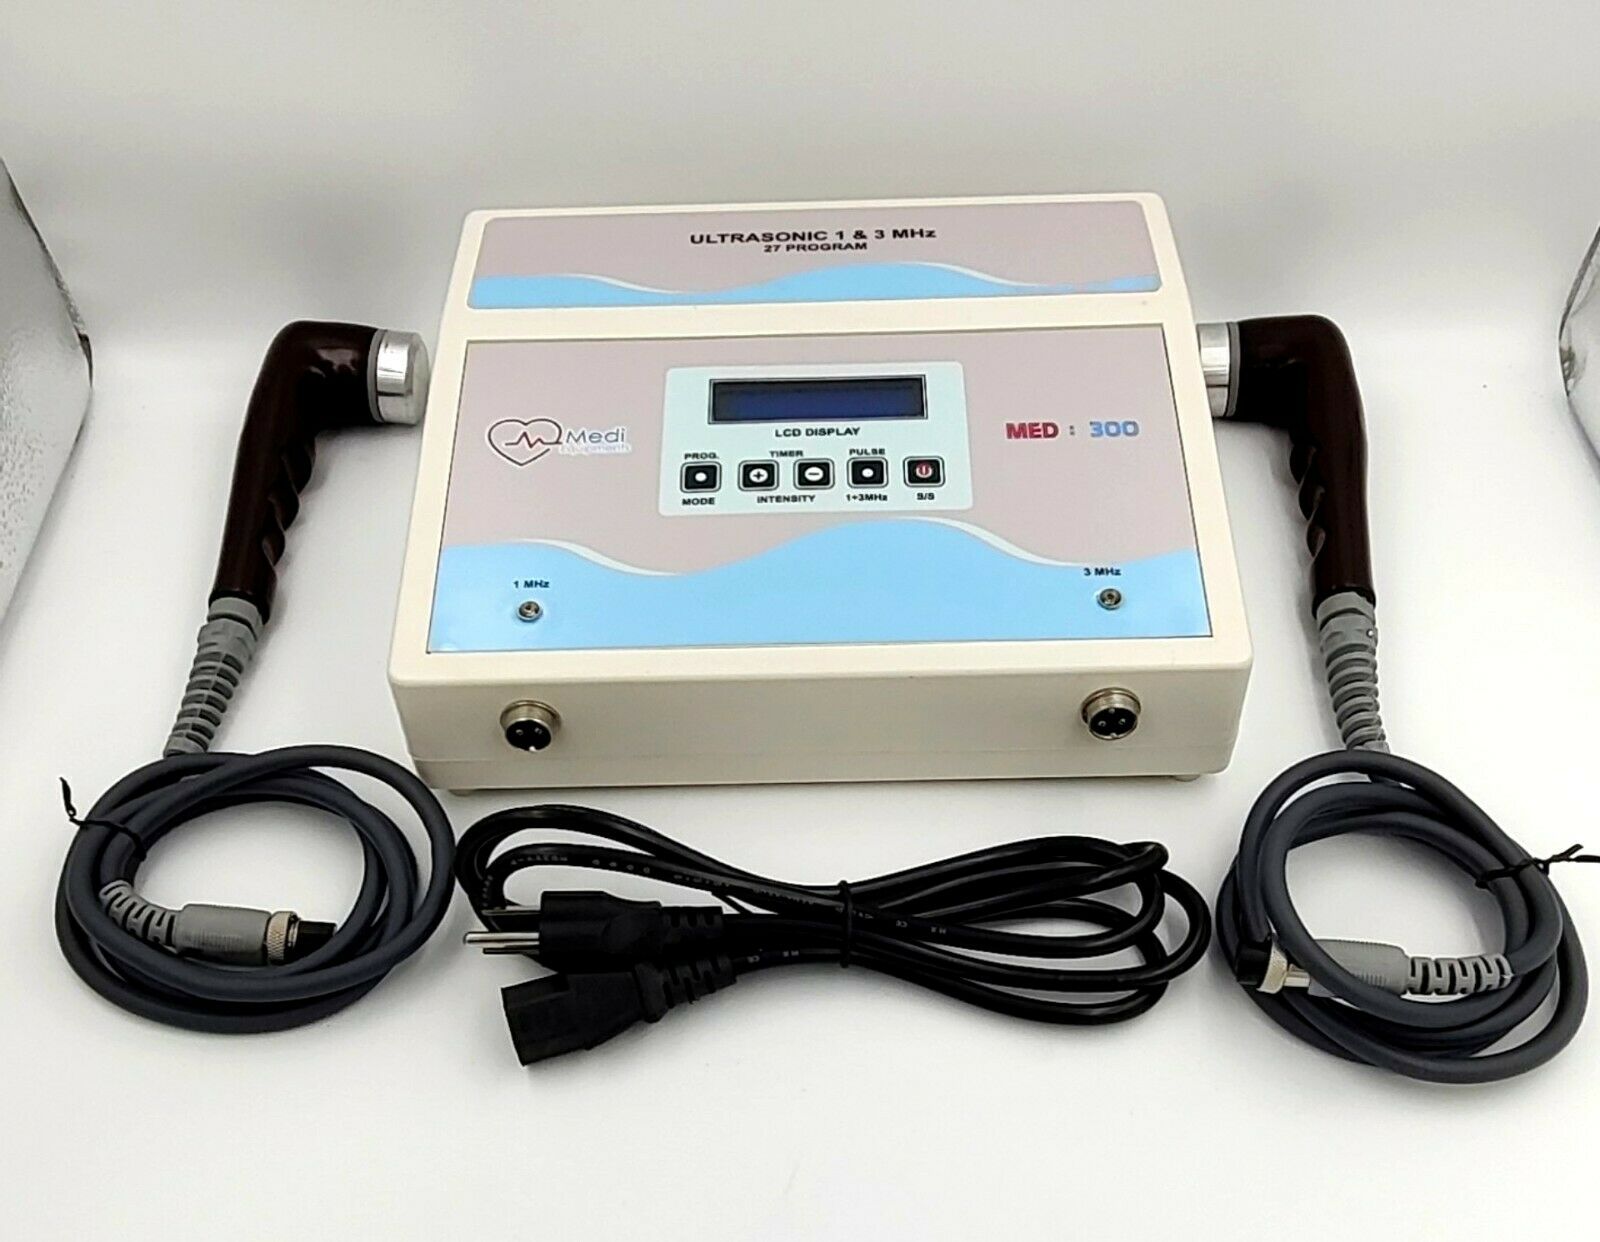 Ultra Sound Therapy Equipment - Ultrasound Therapy Machine Manufacturer  from Chennai